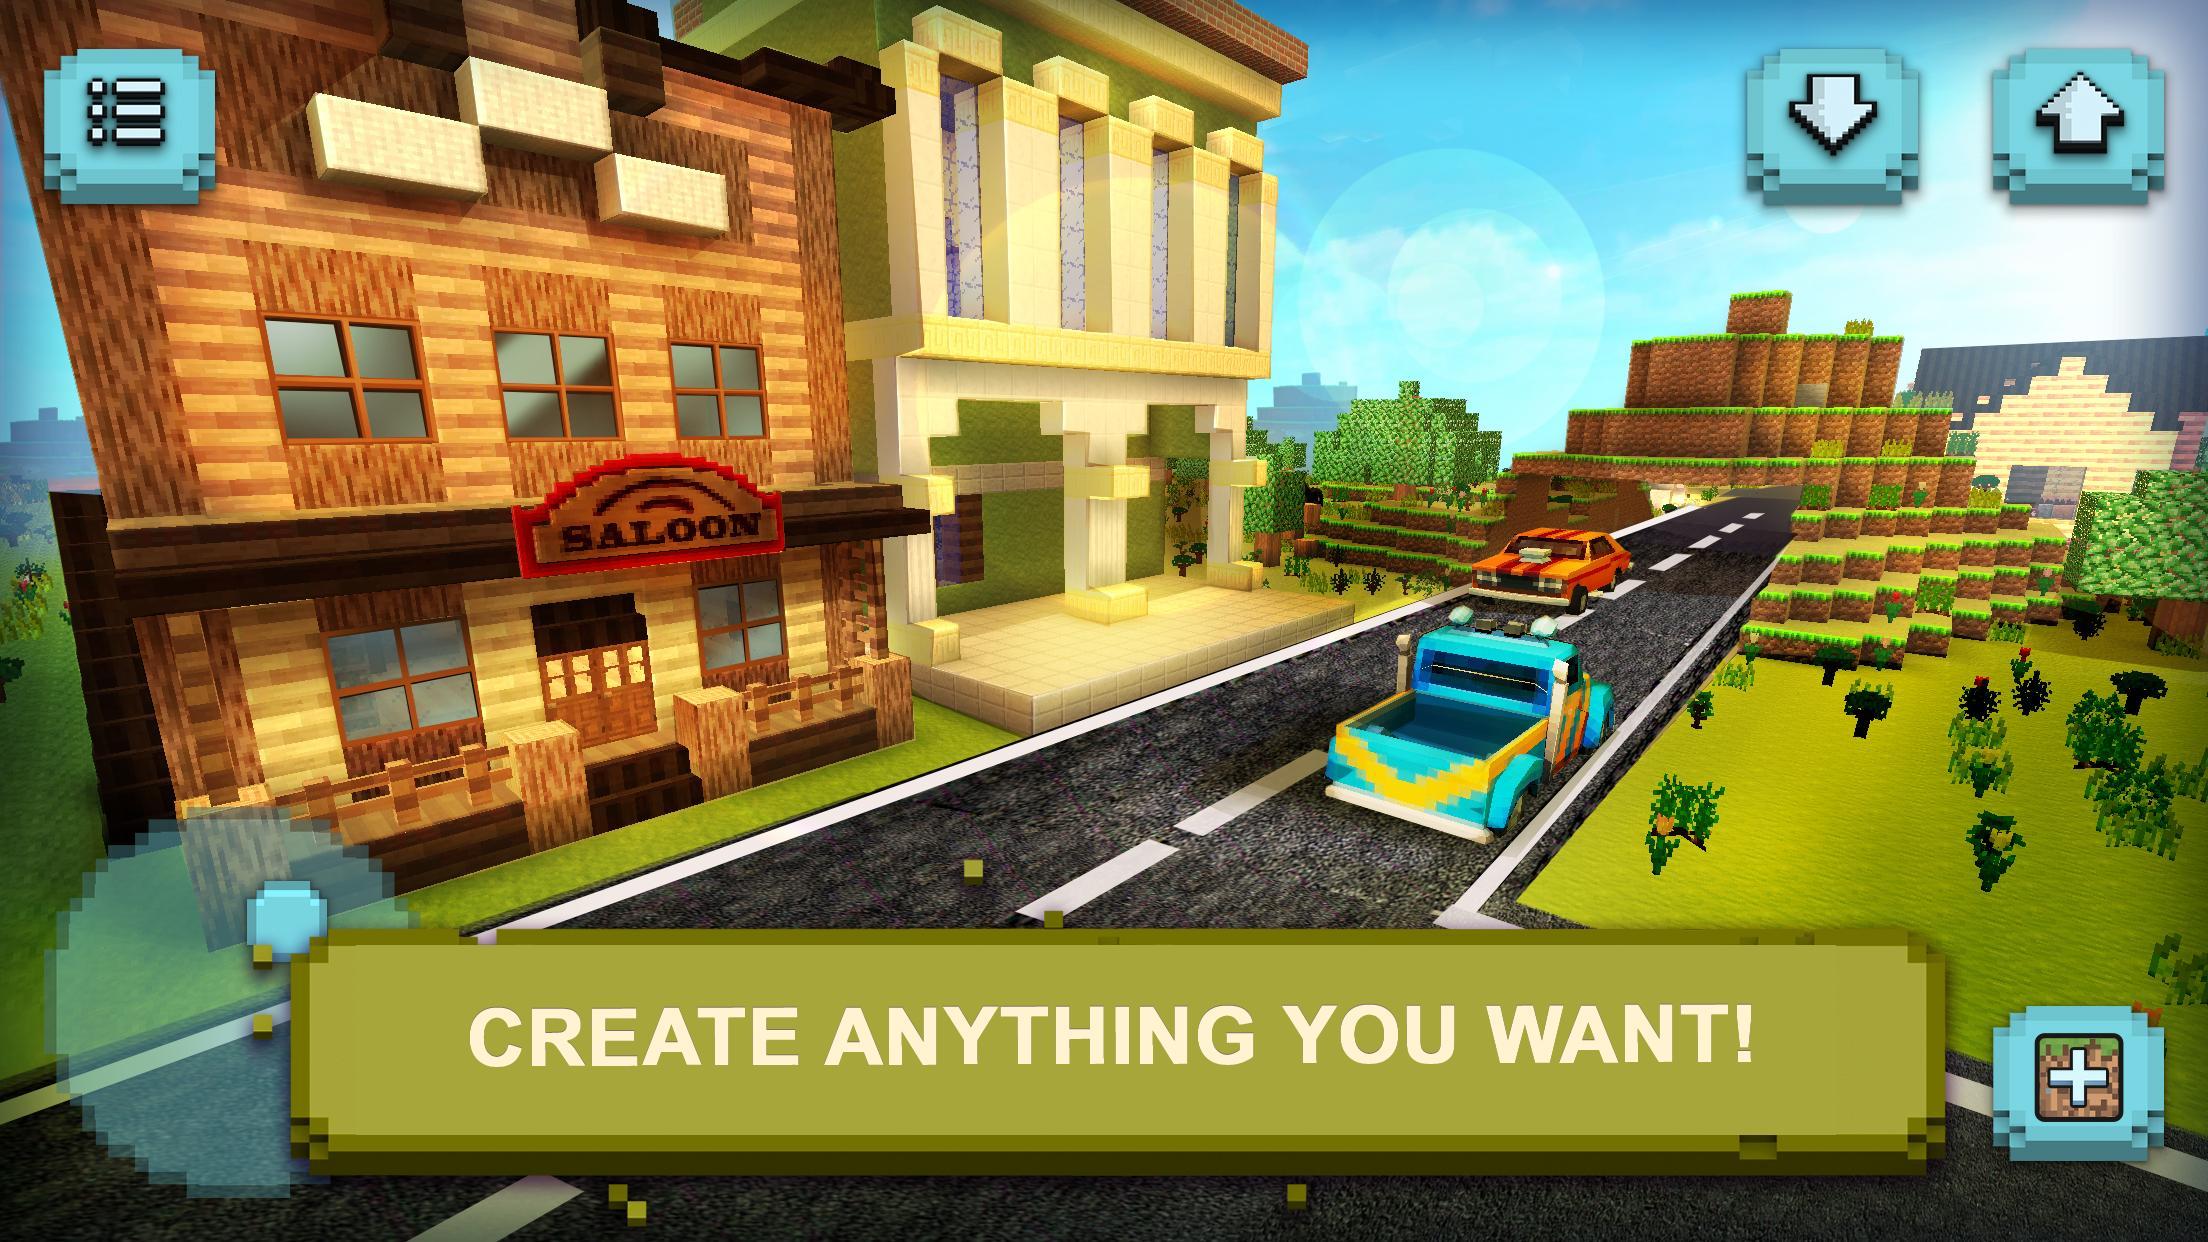 Builder Craft: House Building & Exploration for Android - APK Download